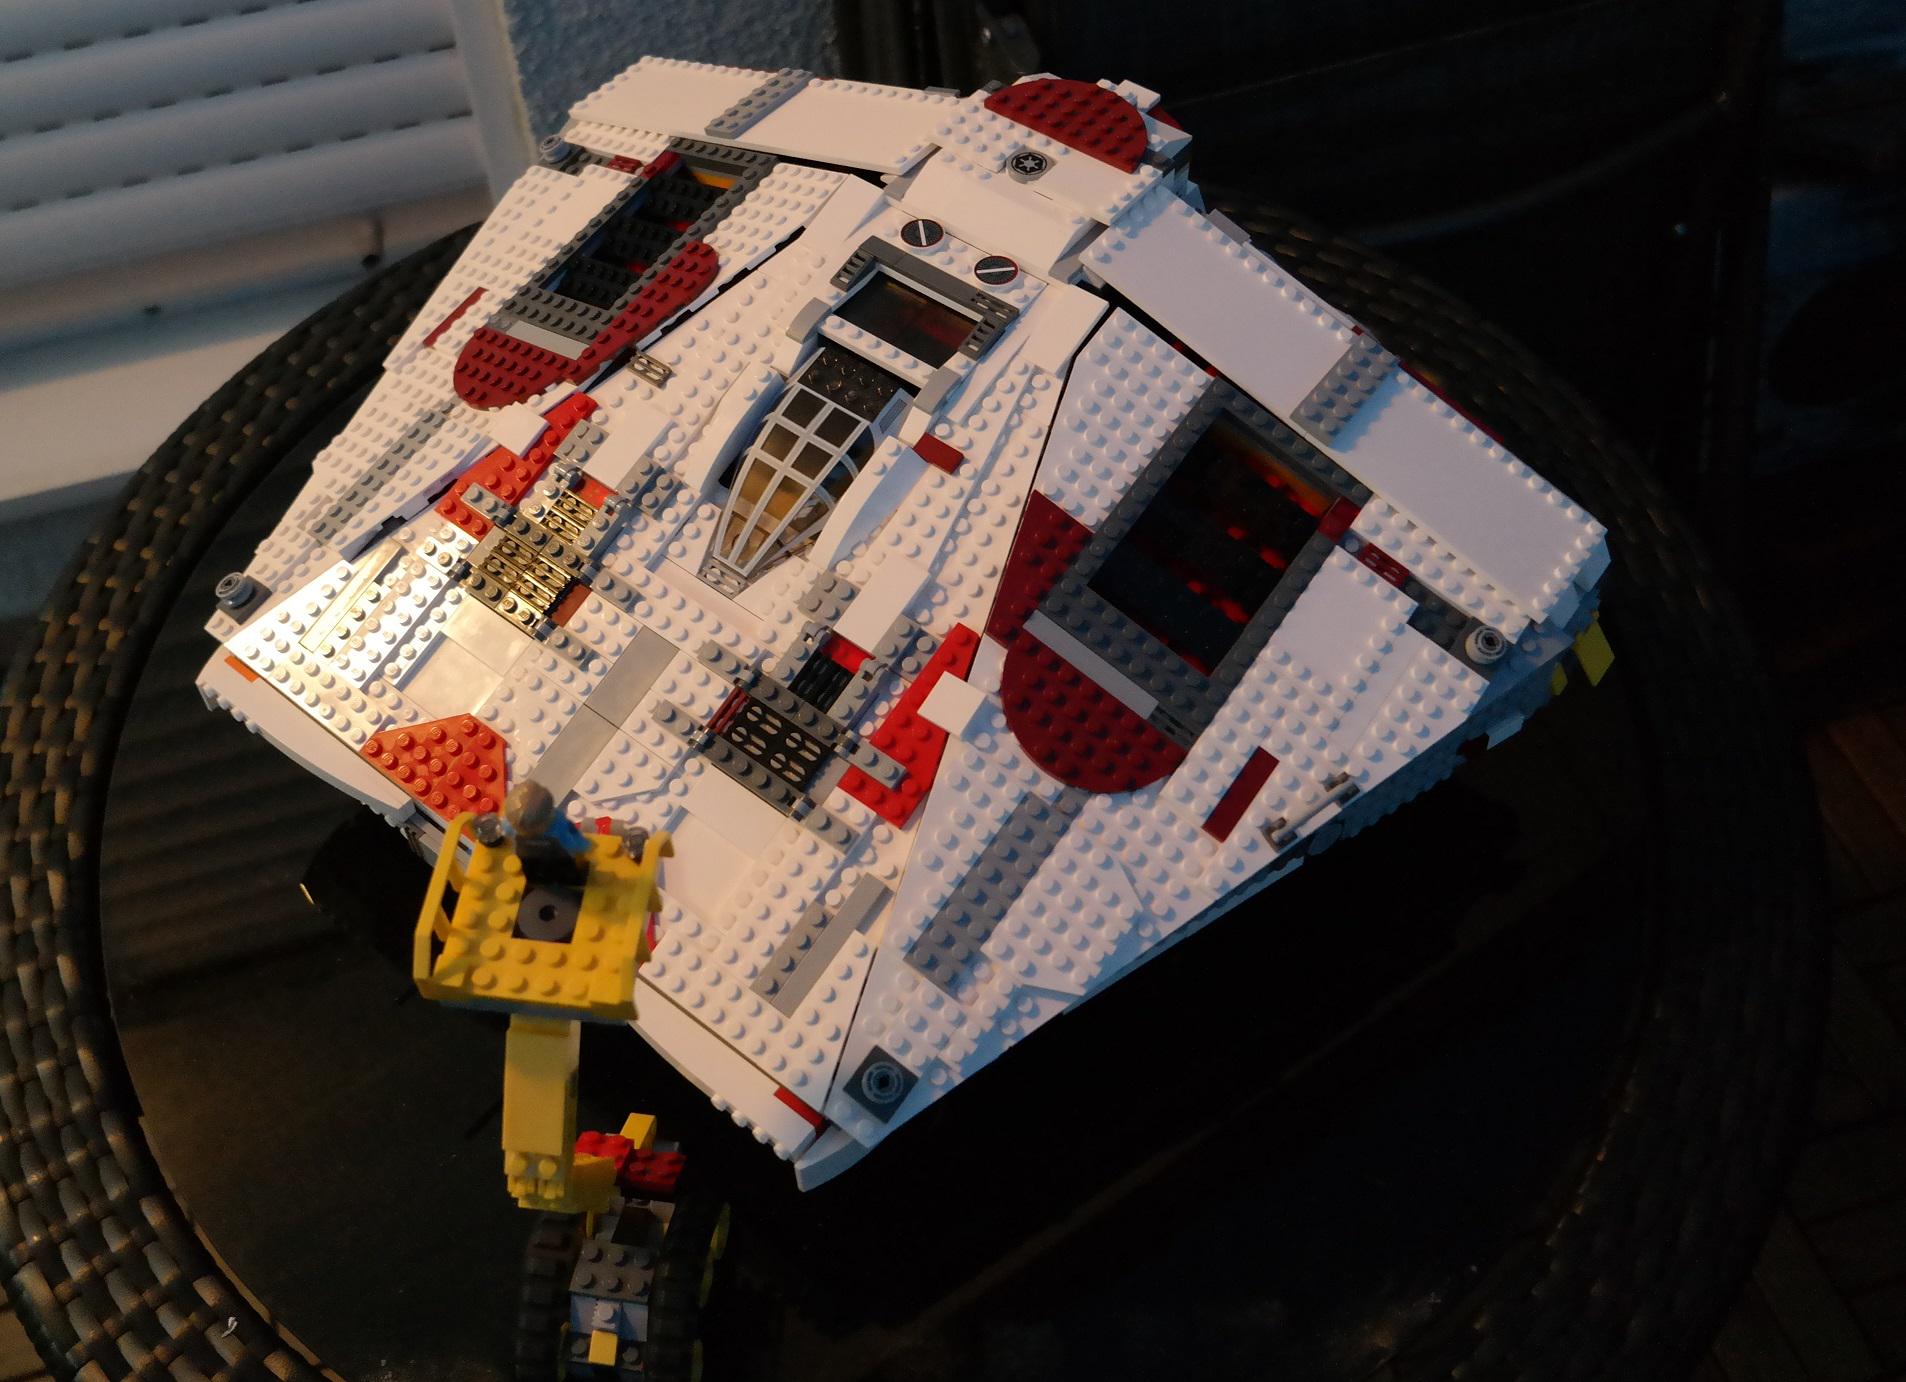 Elite Dangerous on Twitter: "Stepping up the Dangerous Lego creations, created this amazing Sidewinder. http://t.co/MZMWCPRild" / Twitter